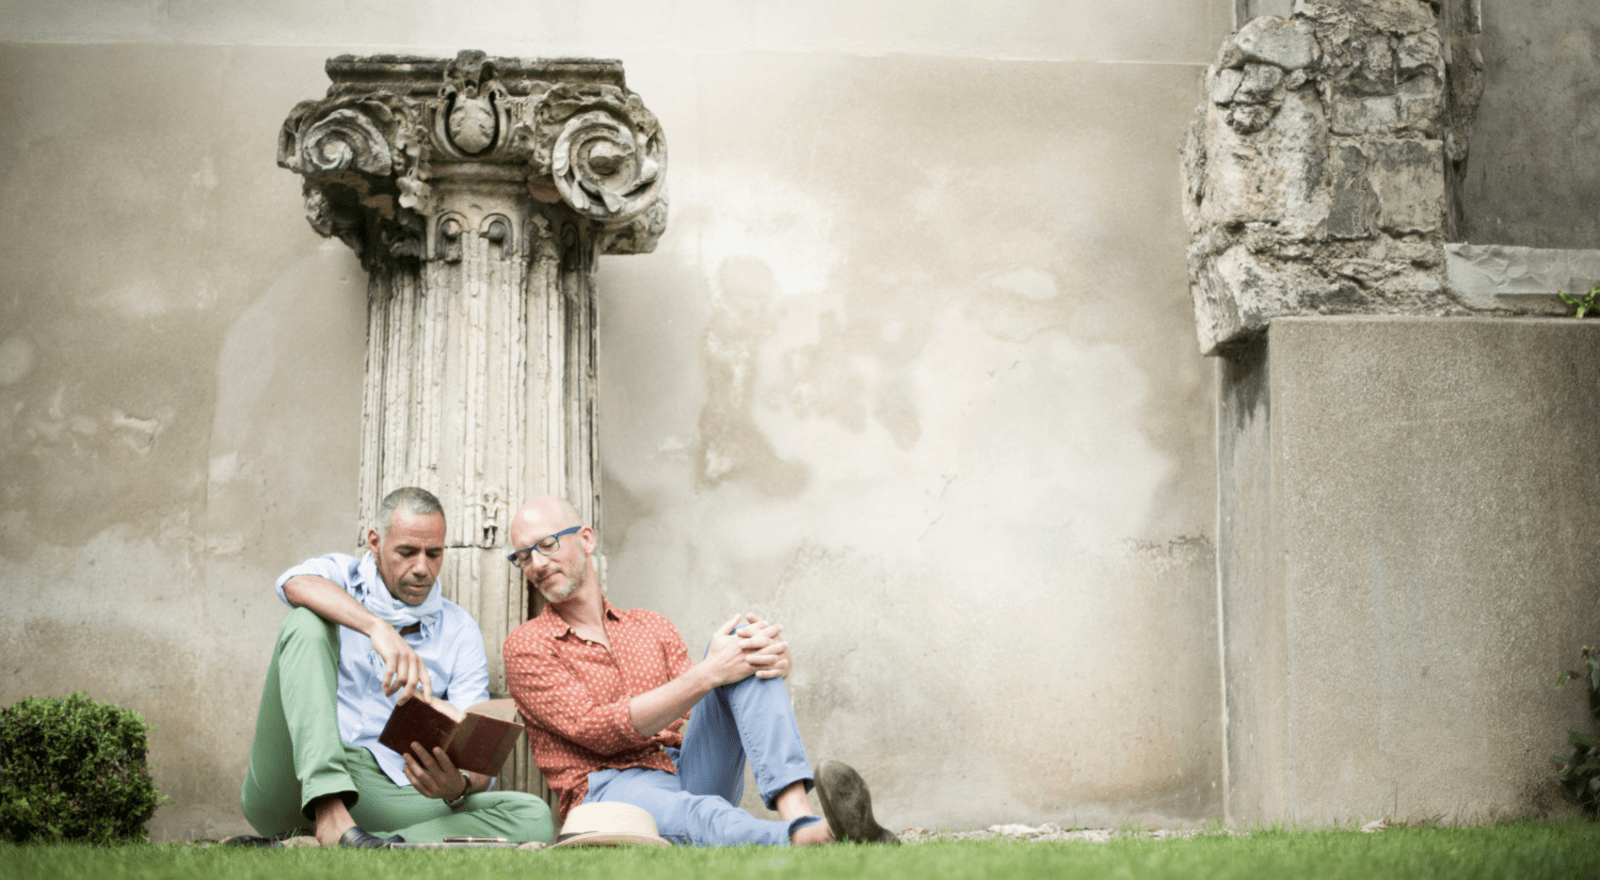 two men sitting on grass in front of stone columns reading a book